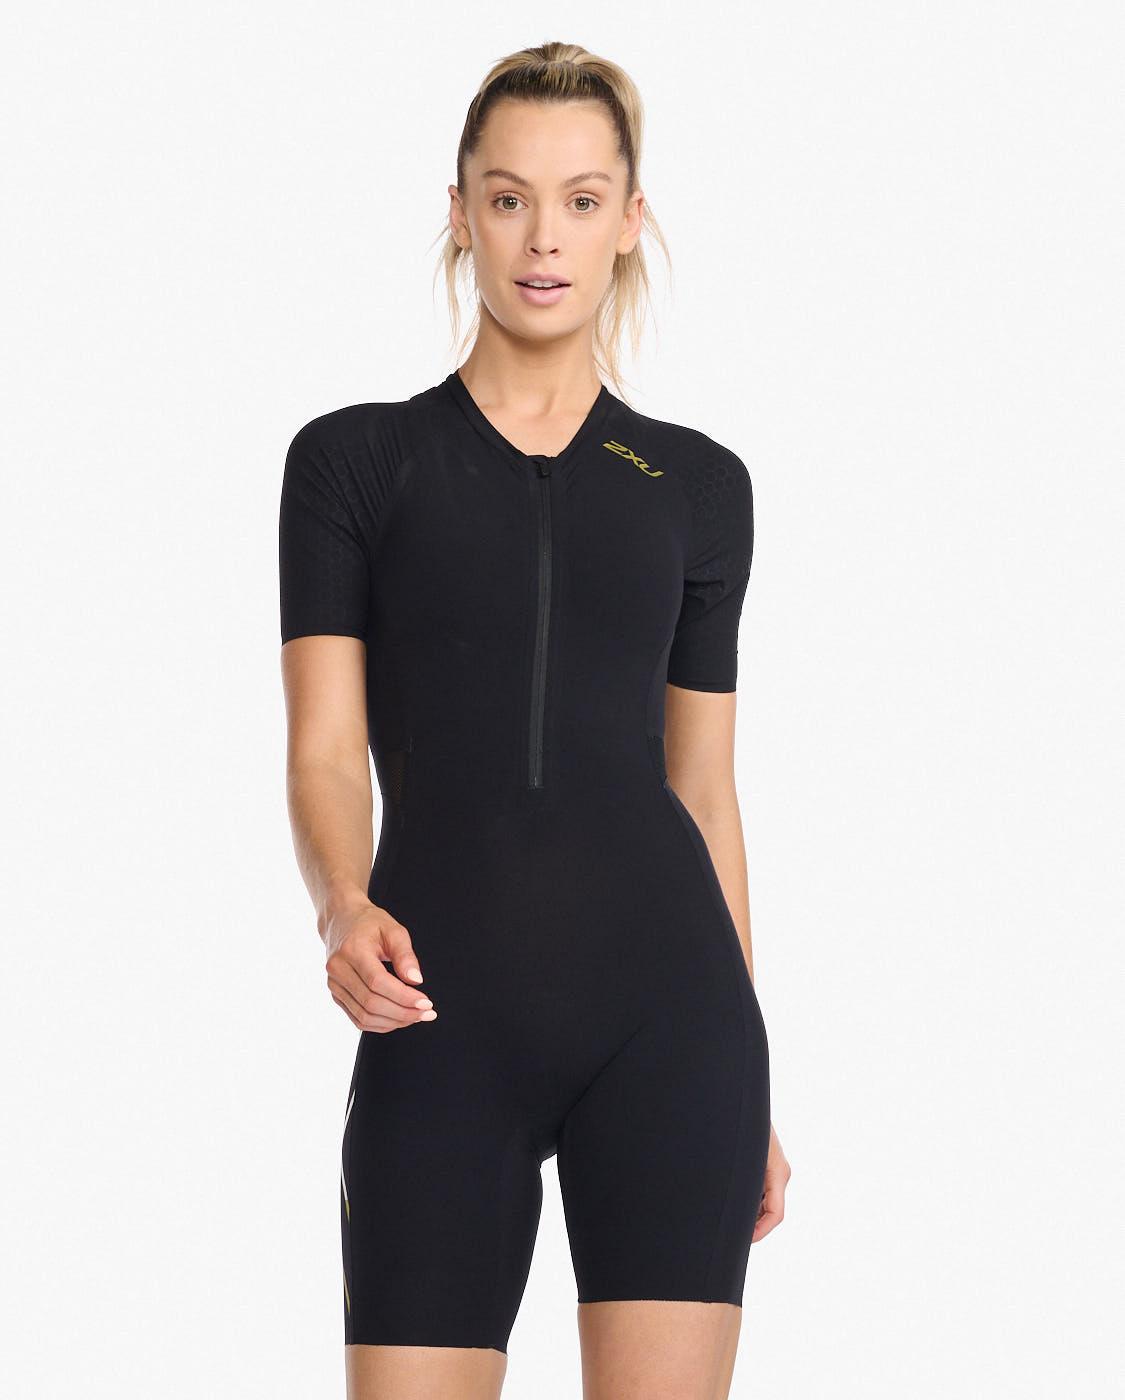 2xu Womens Compression Light Speed Sleeved Trisuit - Black/copper Reflective